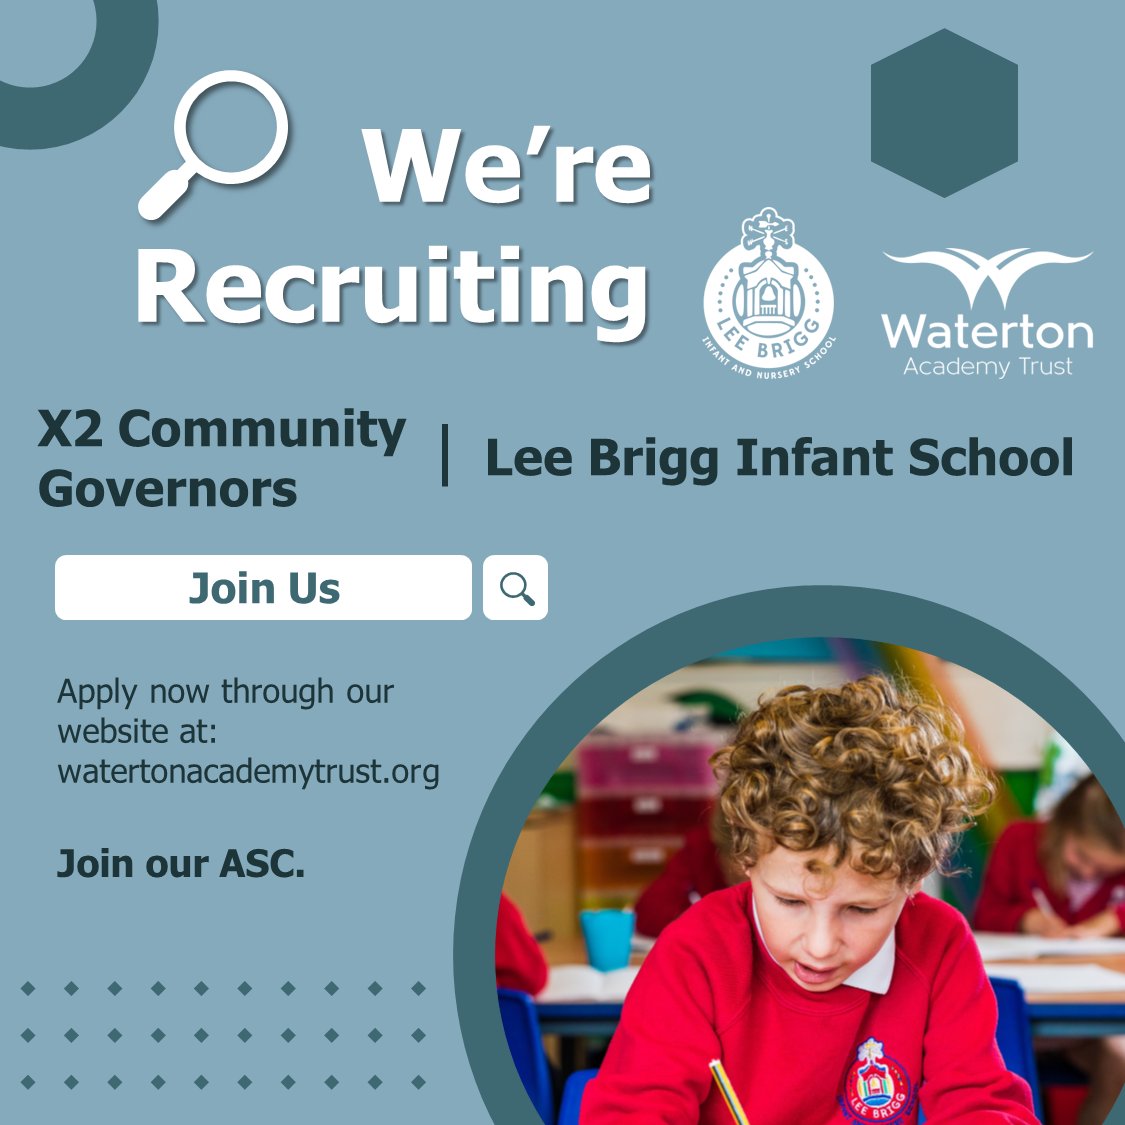 📋@Lee_Brigg is looking to appoint two new Community Governors to its Academy Standards Committee. 📞Want to find out more? Please visit the school office to arrange a discussion with the headteacher. 🔗Interested in applying? Apply Here: forms.office.com/e/B5TJuQmDvq #SchoolGovernance